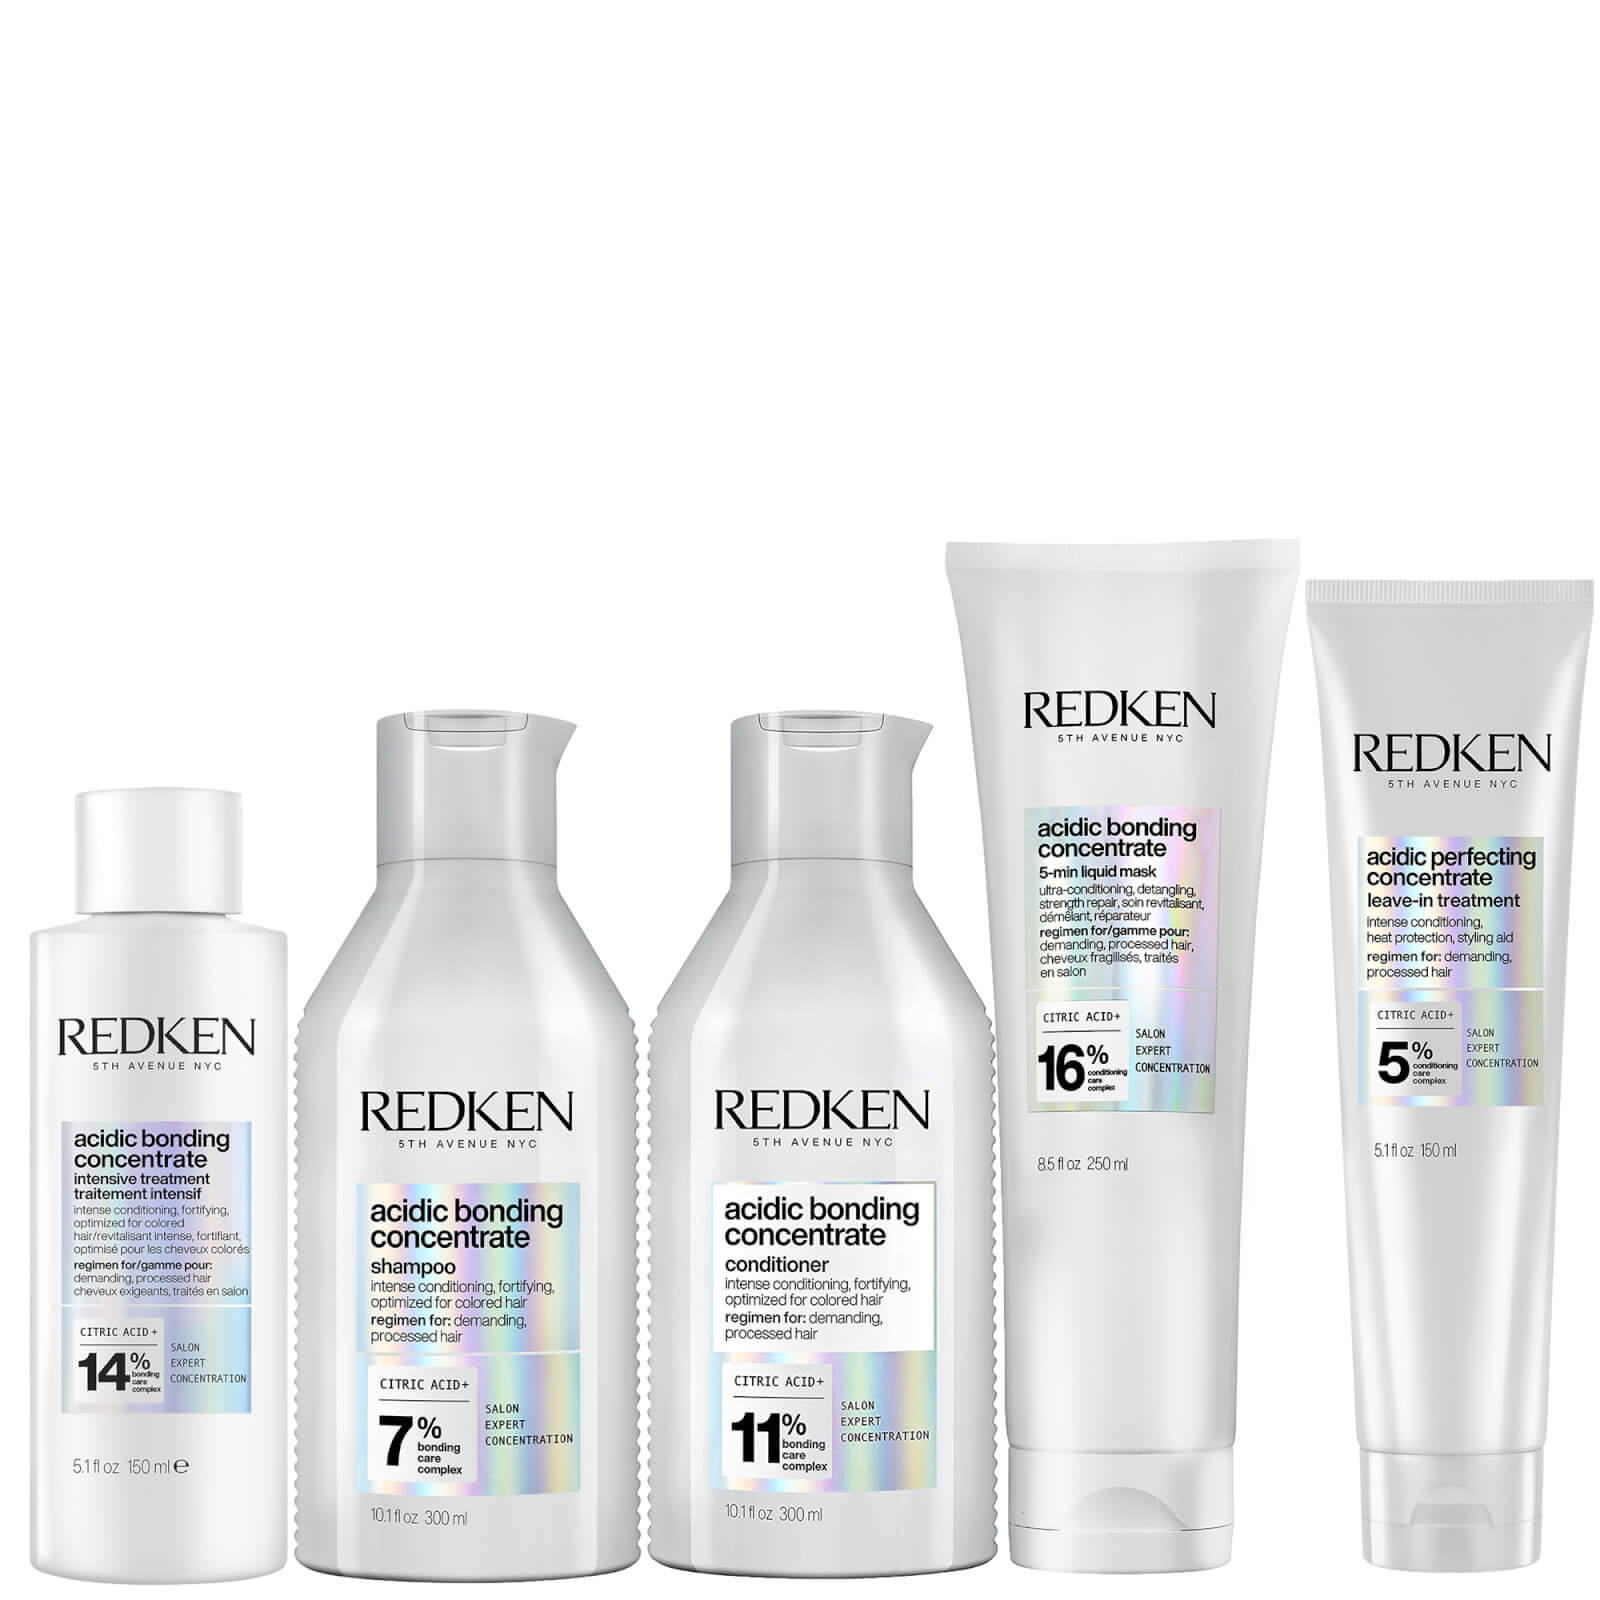 Redken Acidic Bonding Concentrate Intensive Pre-Treatment, Shampoo, Conditioner, Hair Mask and Leave